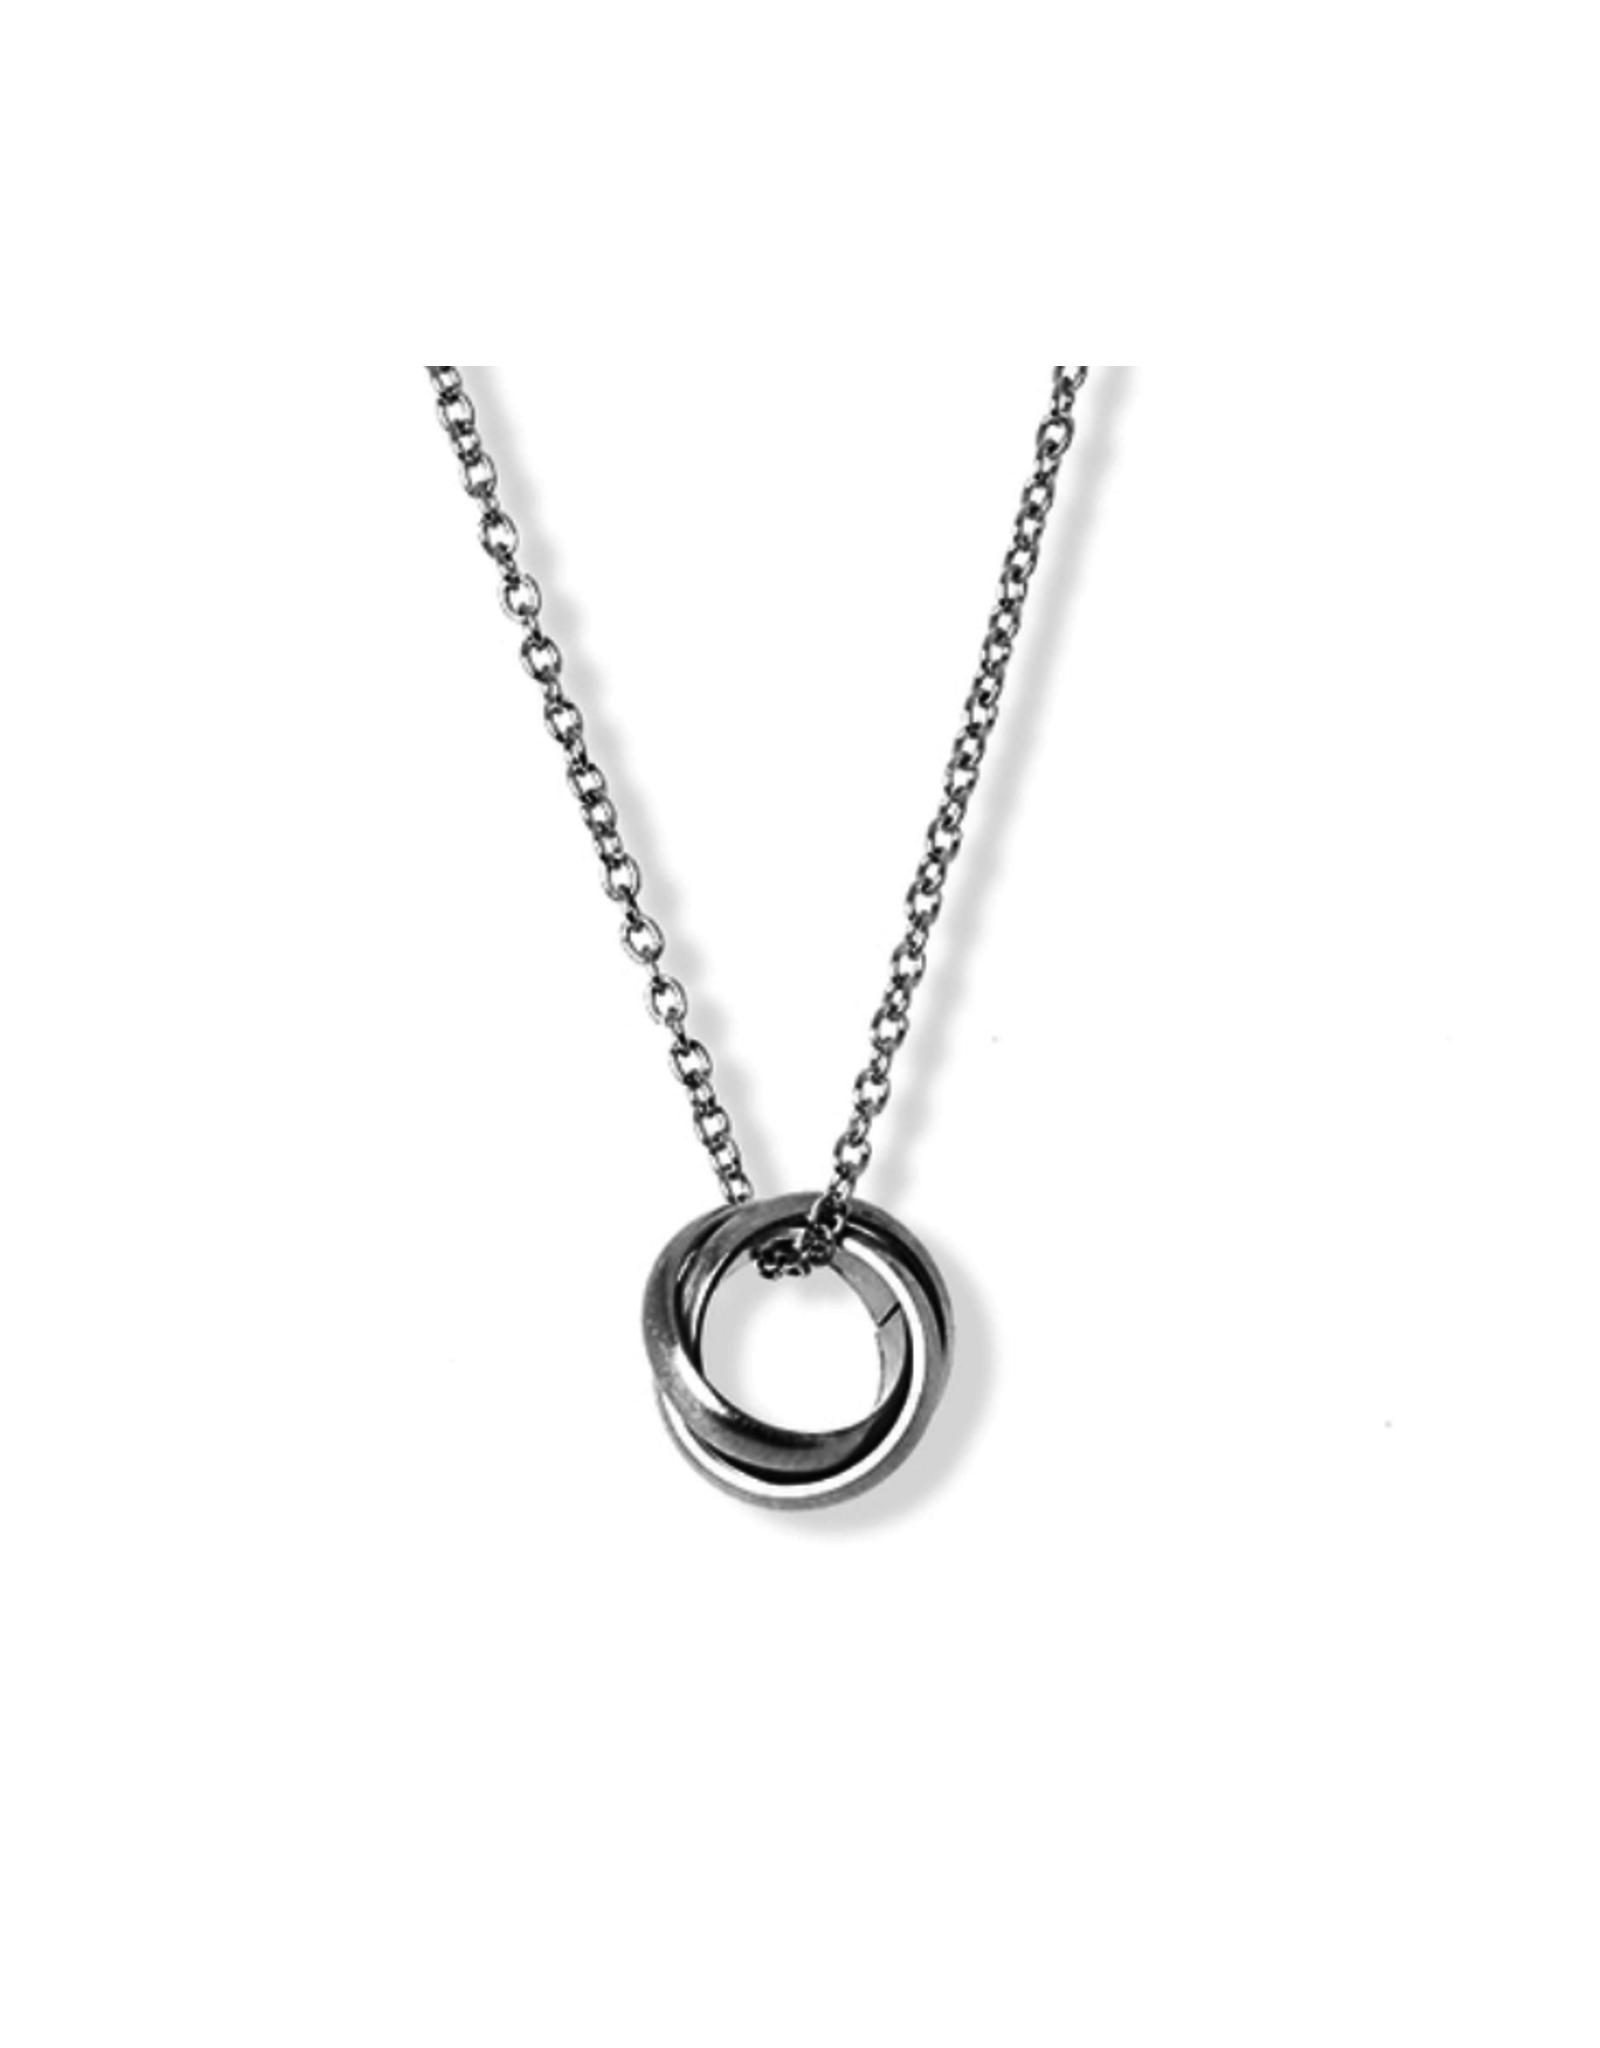 jj+rr Textured Triple Ring Necklace - Brushed Stainless Steel-Silver